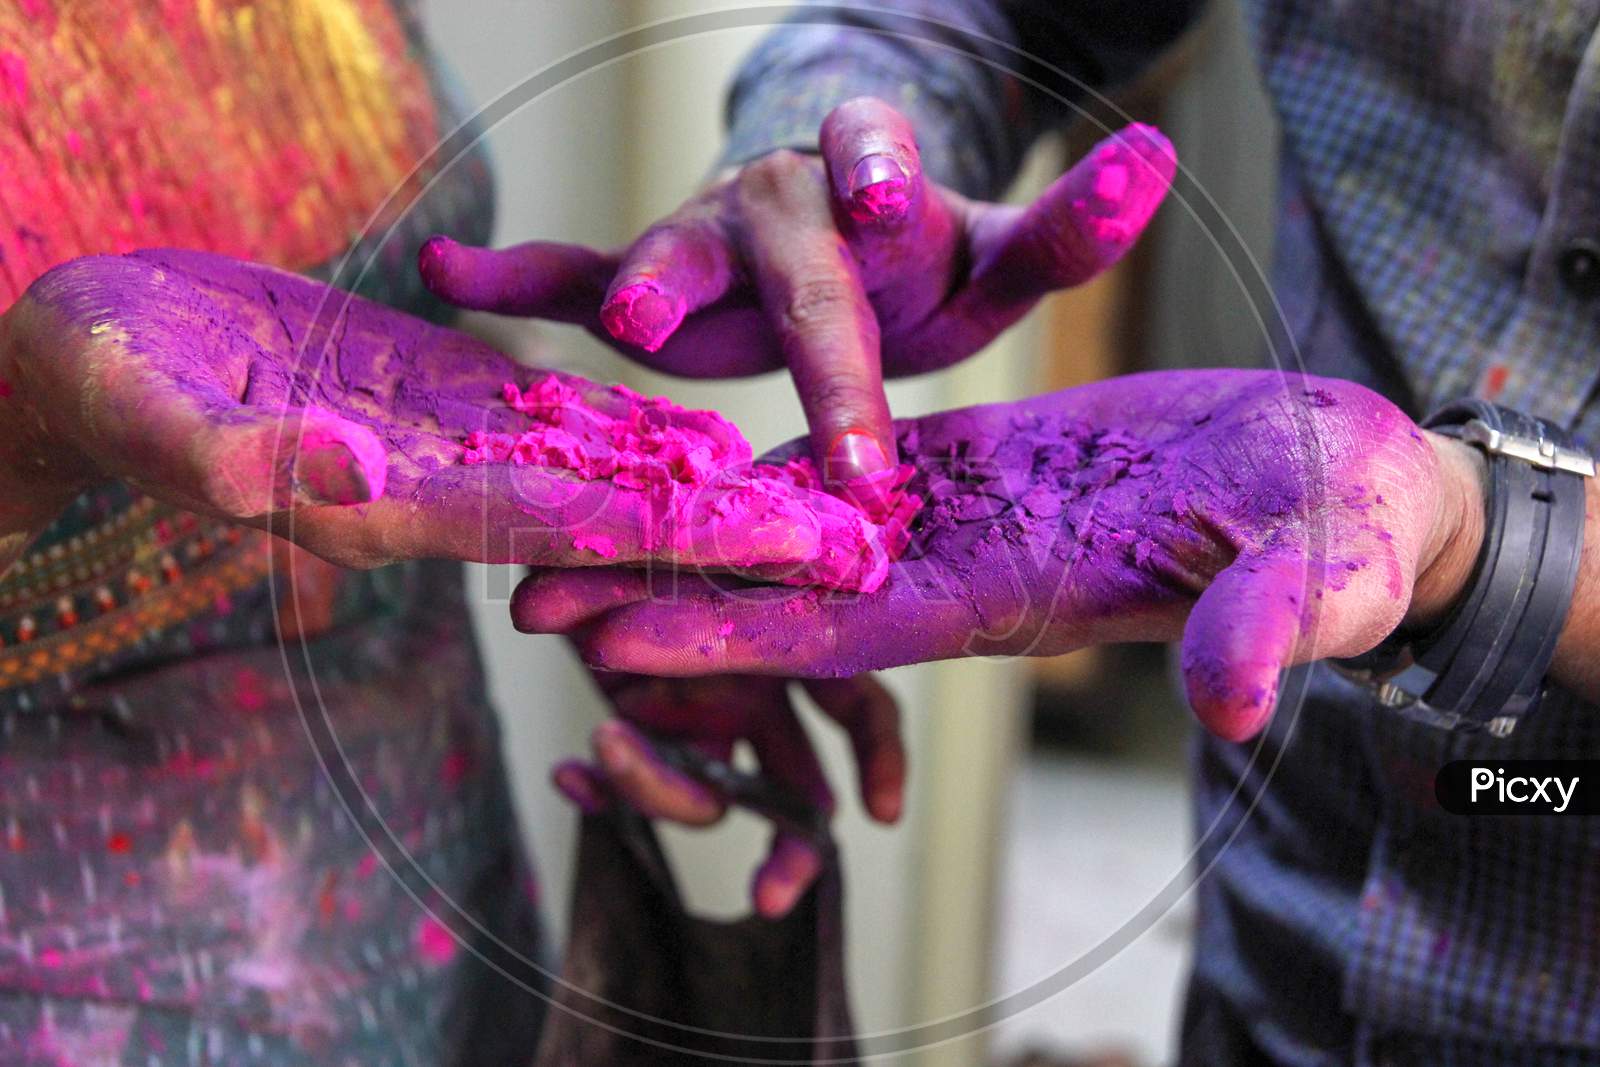 Closeup Photo Of 3 Hands With Holi Colors Mixing The Colors With Finger. Holi Festival Concept Image.